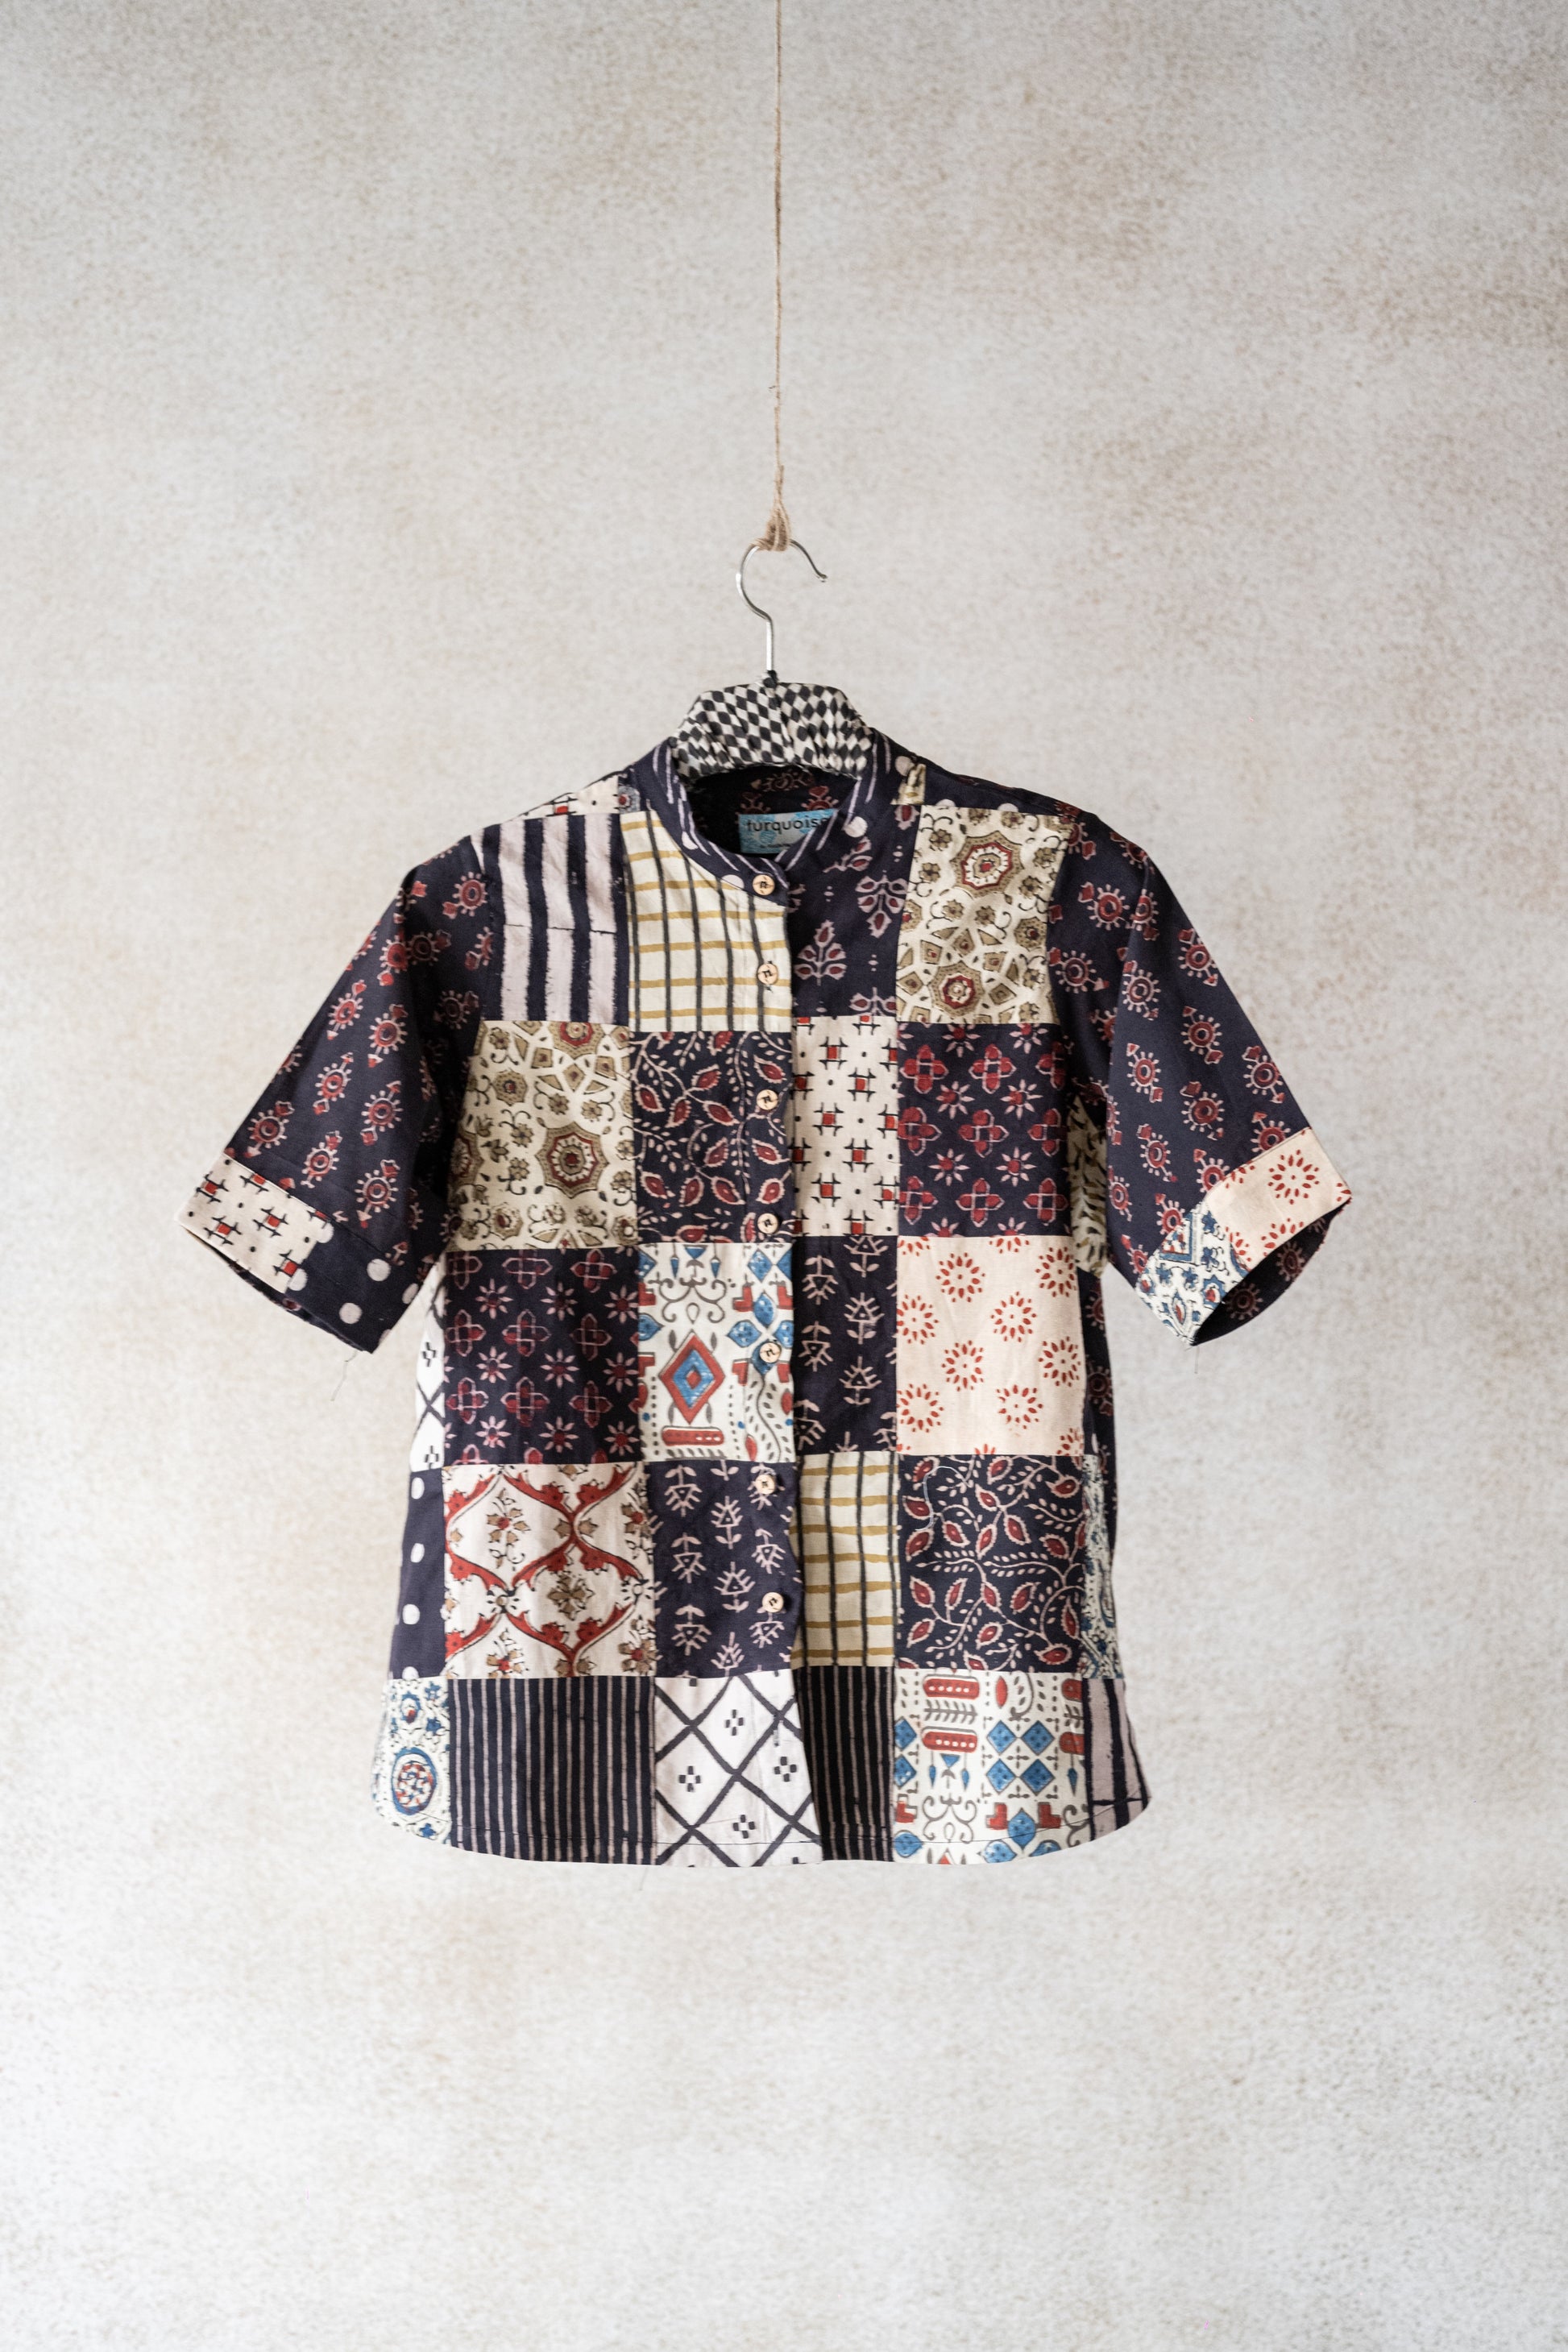 Black and off white ajrakh patchwork shirt, Handmade clothing, Up-cycled patchwork shirt